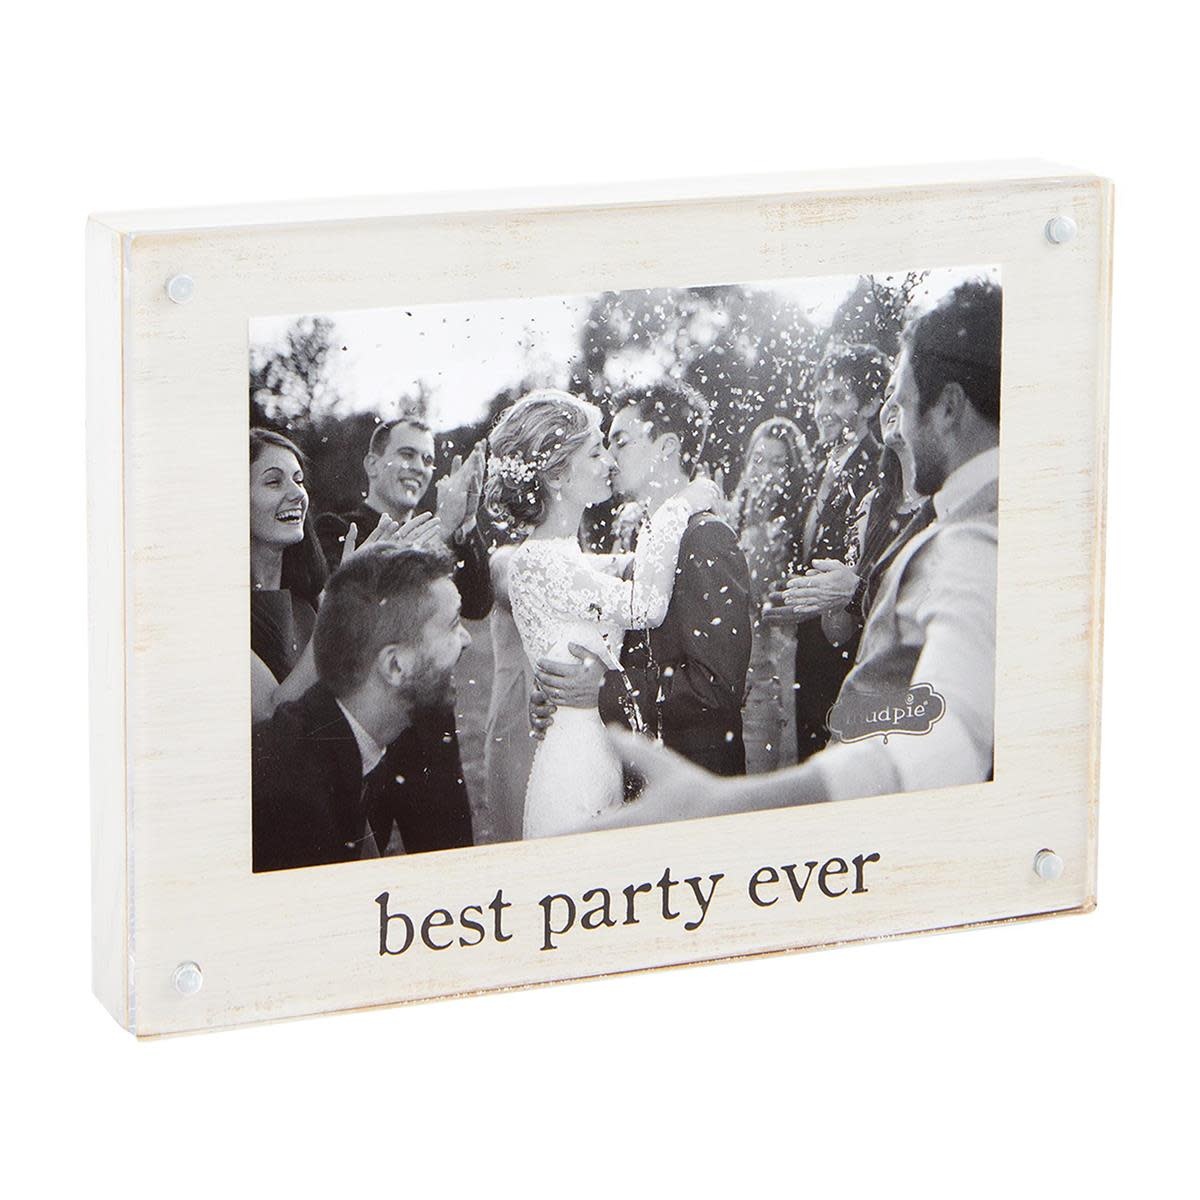 Mudpie Best Party Ever Magnetic Block Frame